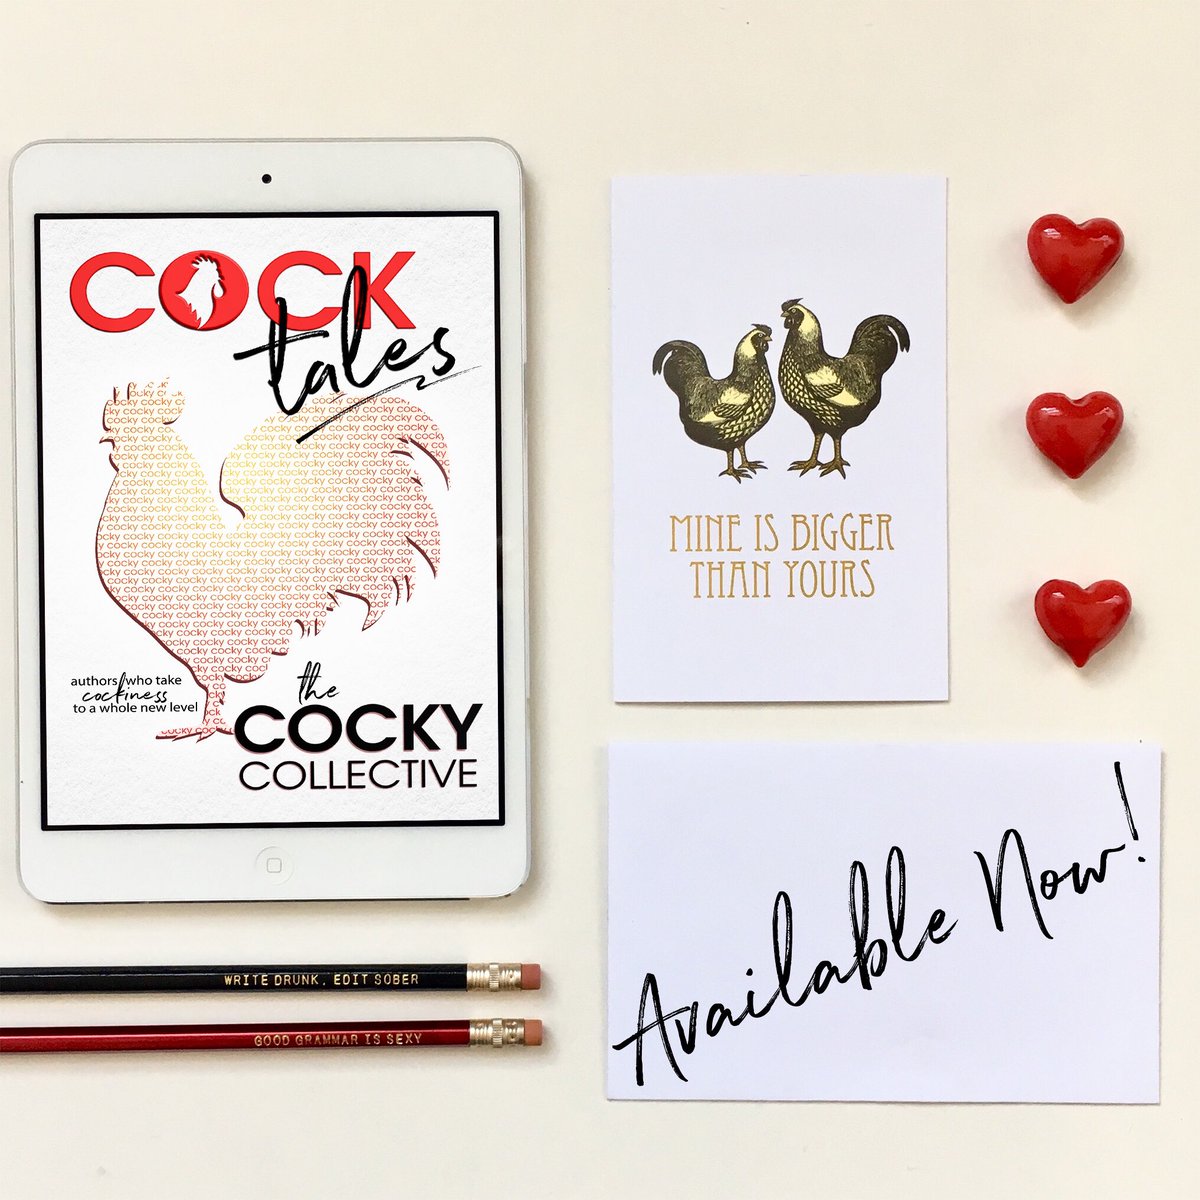 🐔🐔 Cocktales 🐔🐔
 #LimitedReleaseAnthology #OriginalMaterial, from some of your favorite bestselling authors is #LIVE
#WriteDrunkEditSober #GoodGrammarIsSexy #FightLikeARomanceAuthor #TeamAuthors #AmazingAuthorsUnite
🐔For more information, visit: cockyauthors.com